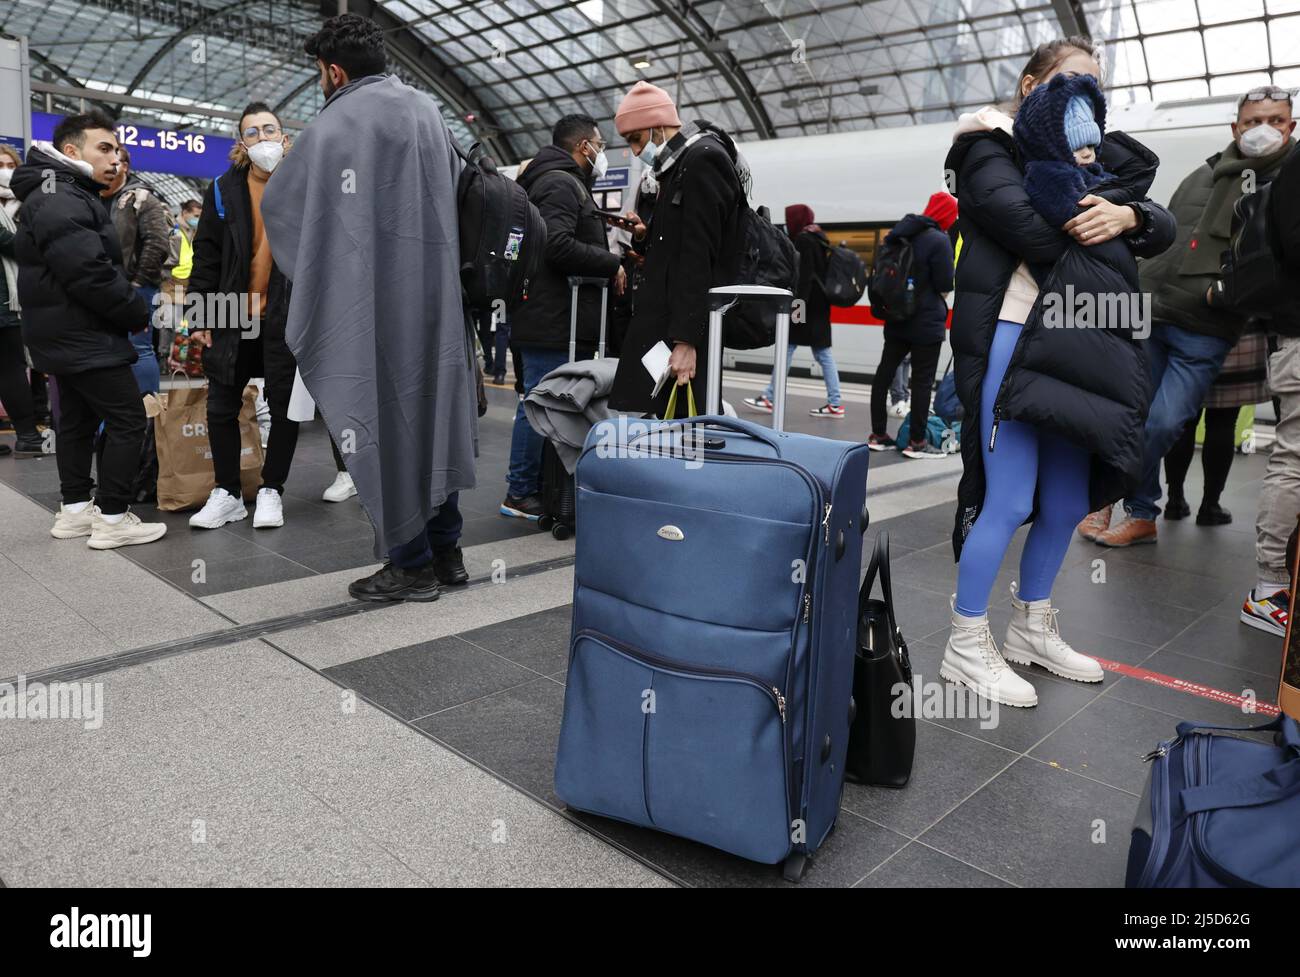 Berlin, 03.03.2022 - Refugees from Ukraine wait for a connecting train at Berlin's main train station. Thousands of refugees from Ukraine have already arrived in Germany. [automated translation] Stock Photo